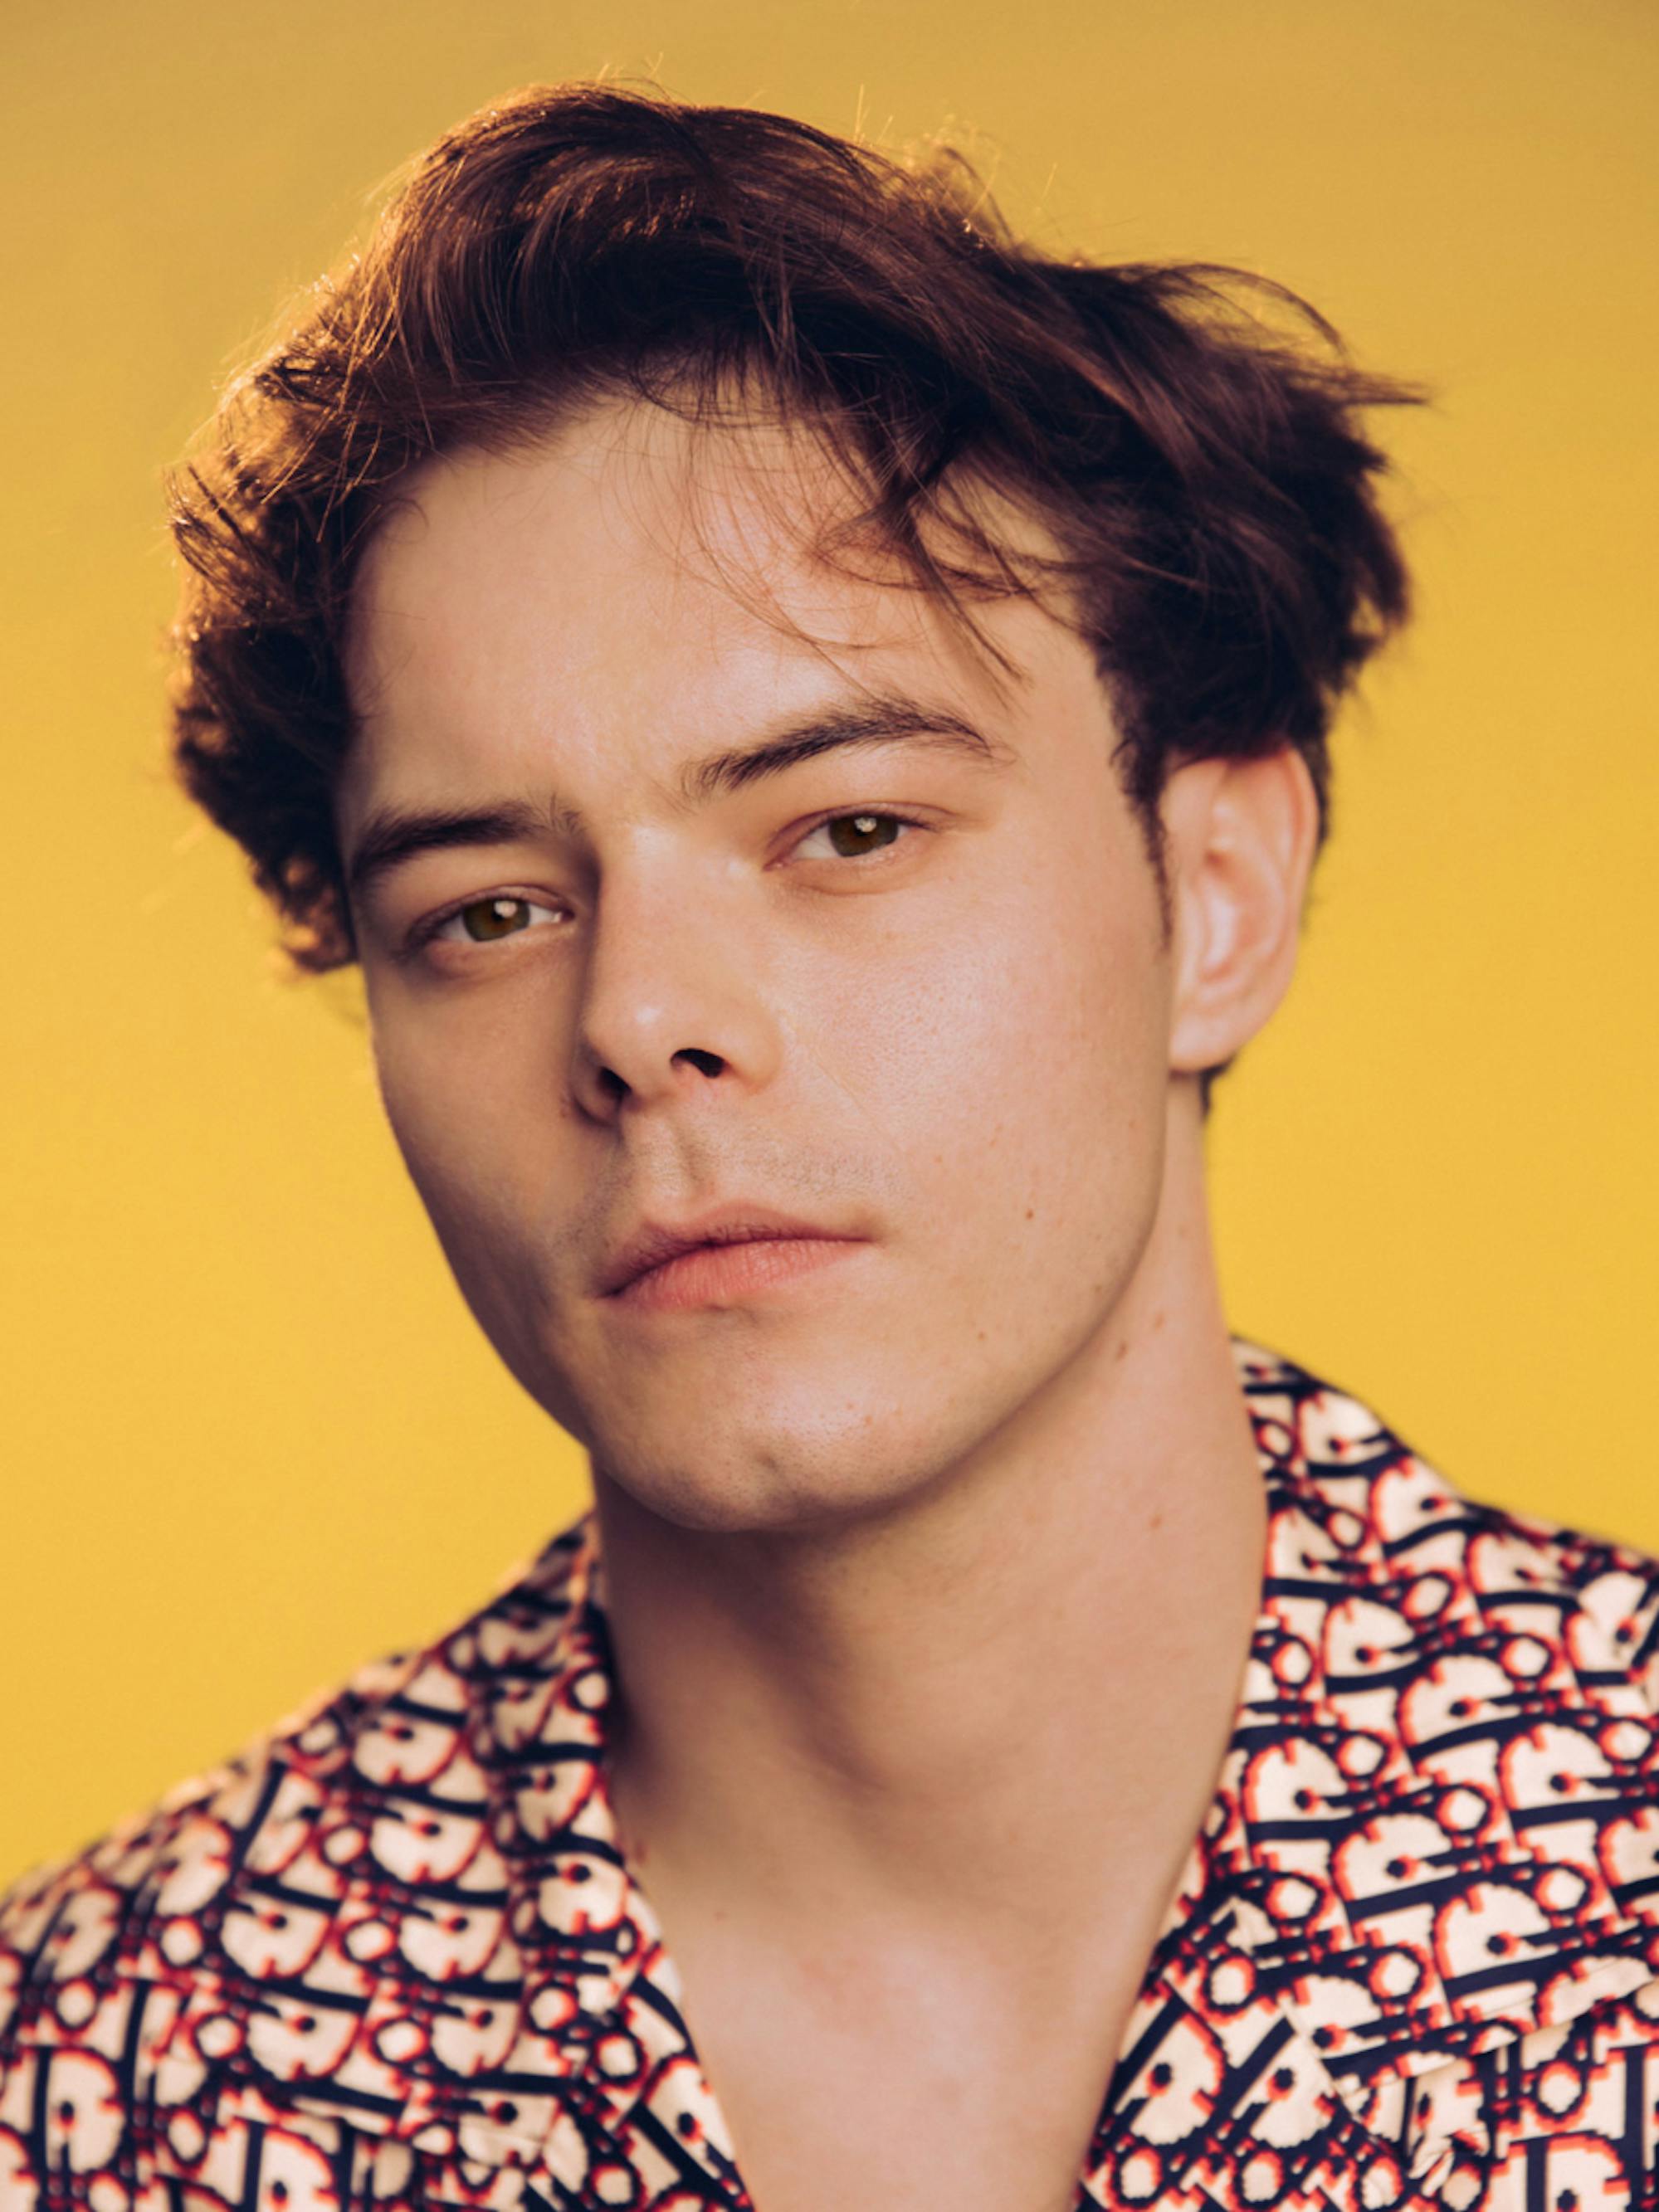 A close-up of Charlie Heaton of Stranger Things in front of a mustard yellow background.